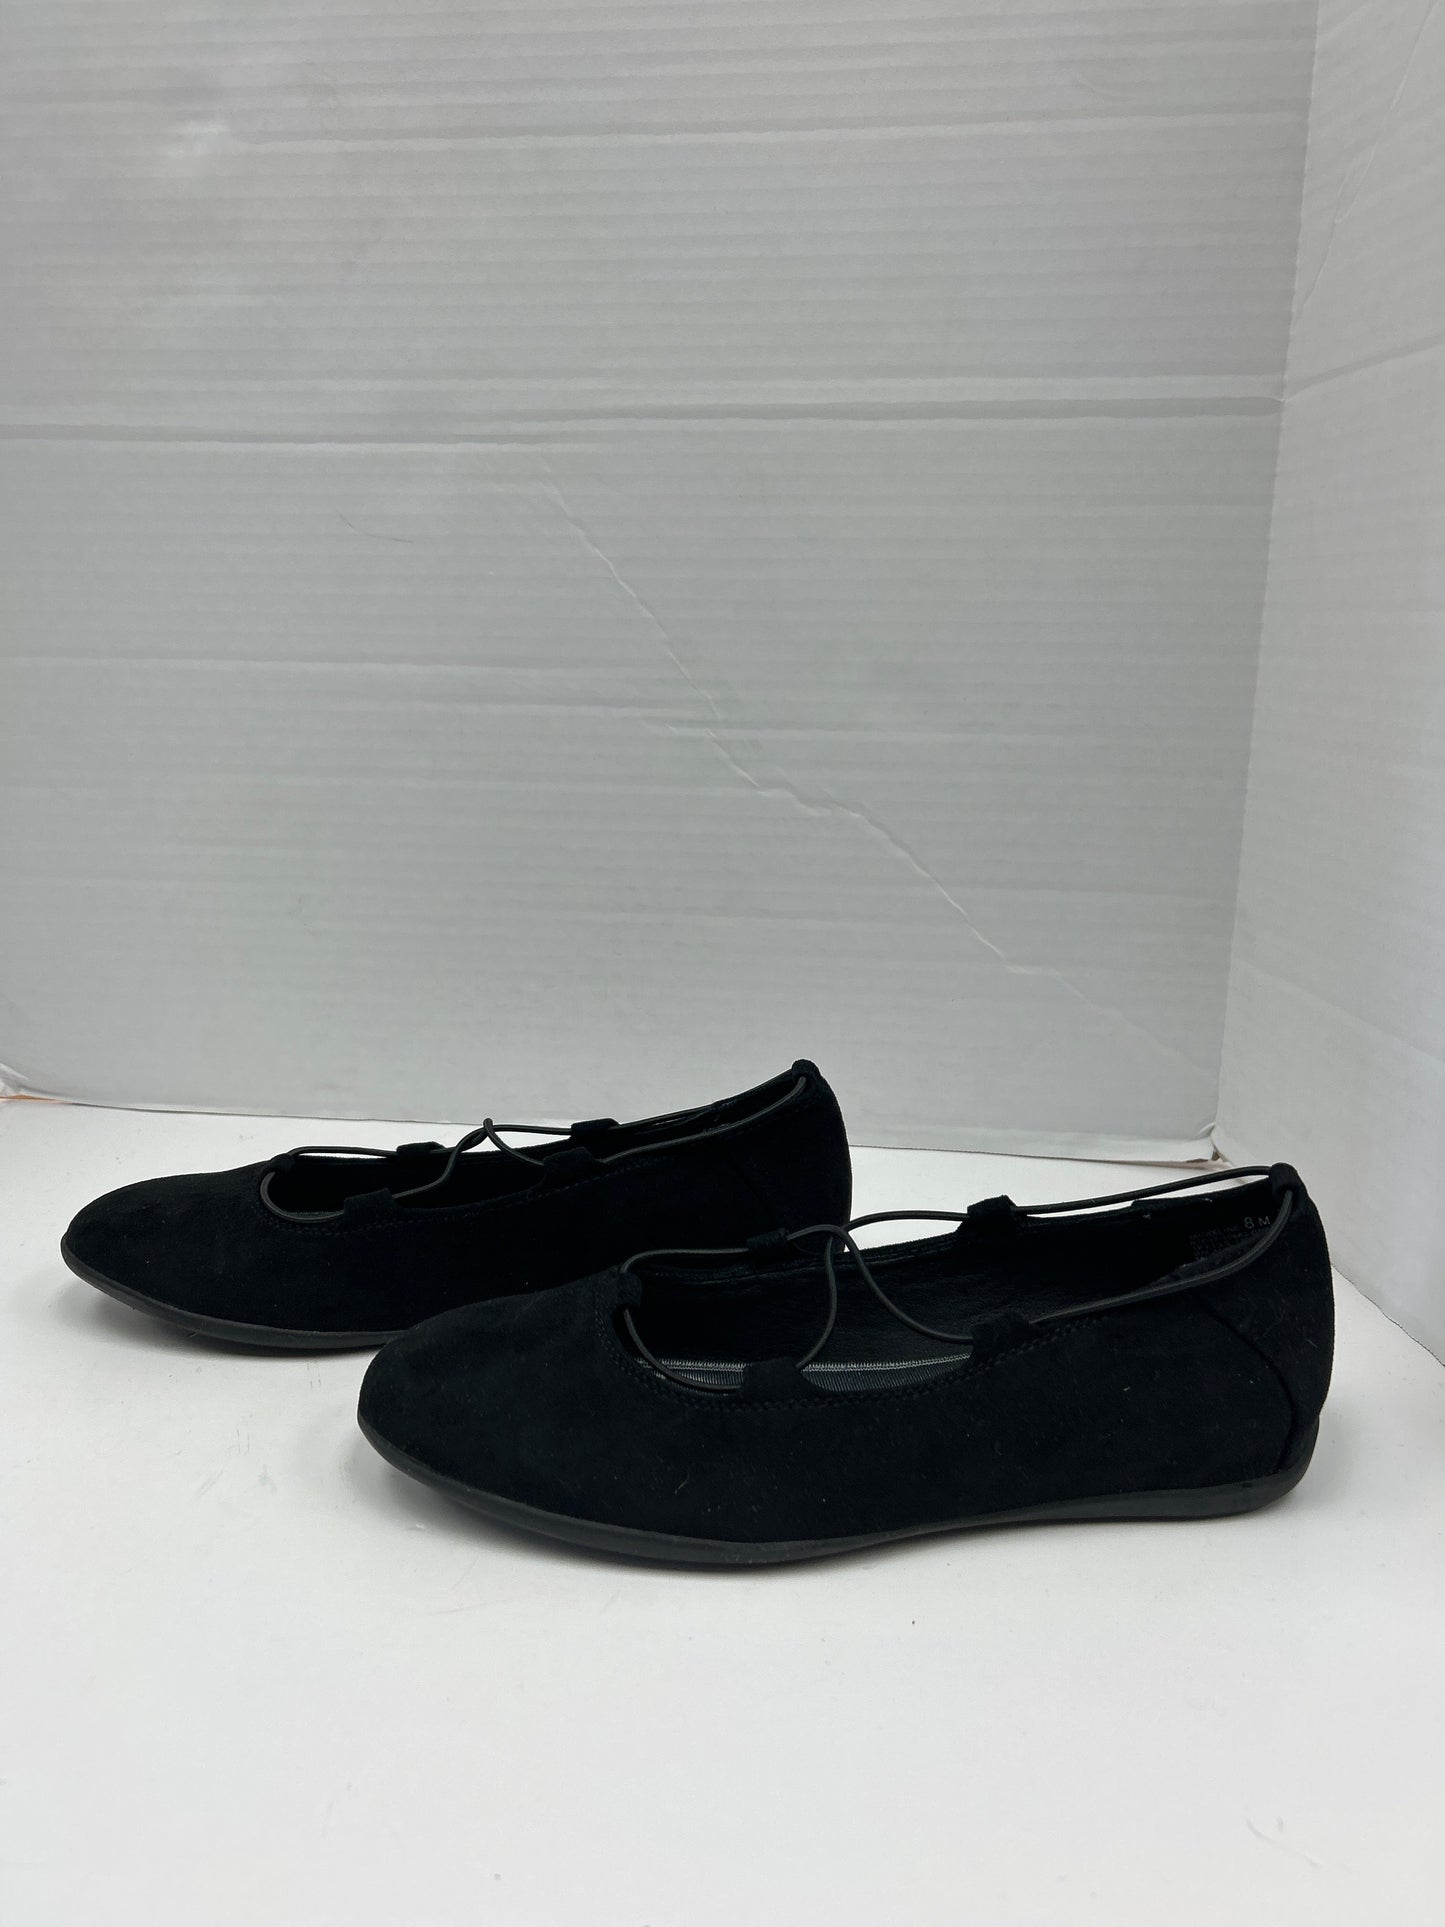 Shoes Flats By Bare Traps  Size: 8